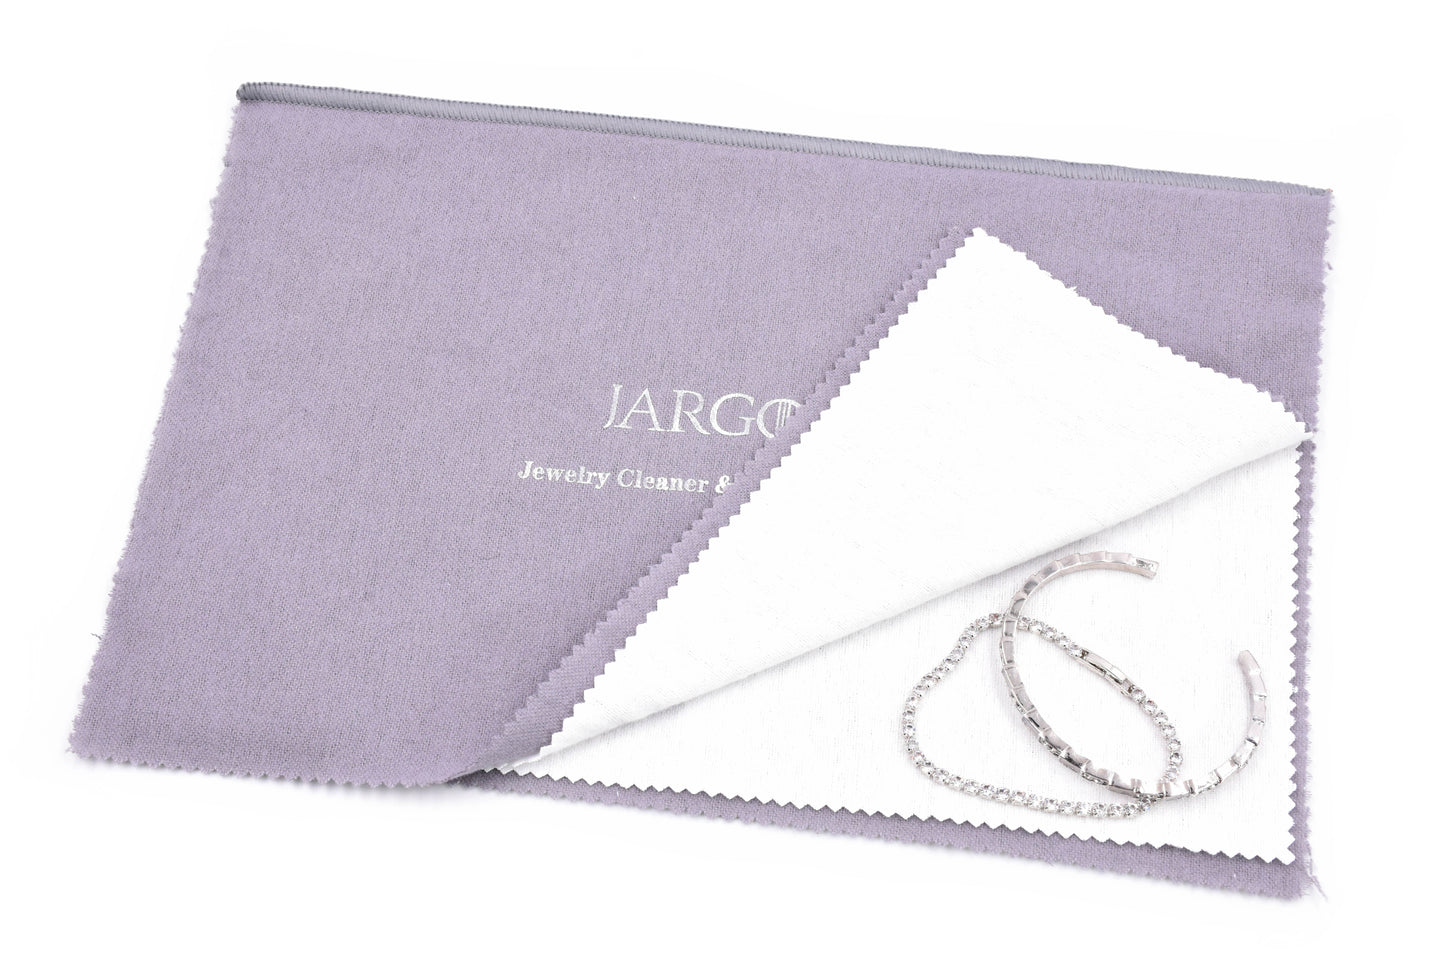 JARGOD Jewelry Cleaning Cloth Silver Polishing Cloth Made with Cotton 11